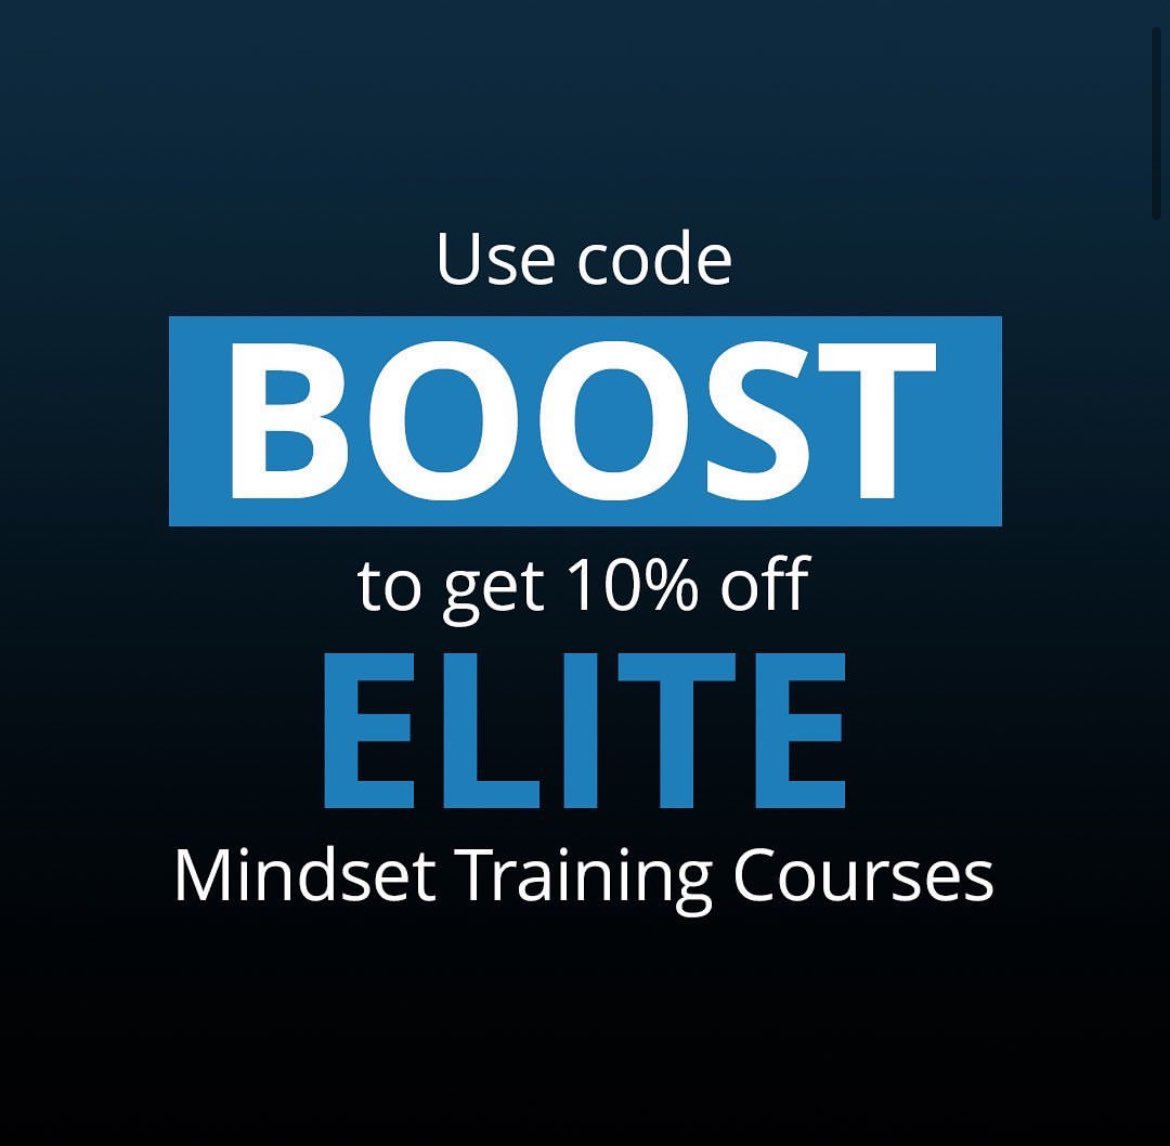 Elite Mindset Training courses focus on boosting confidence, handling pressure and developing work habits in athletes. They feature 9 GREAT college athletes and their insights on the mental game. Use code BOOST for 10% off Mindset Training Courses. #ryzer #boost #EMT